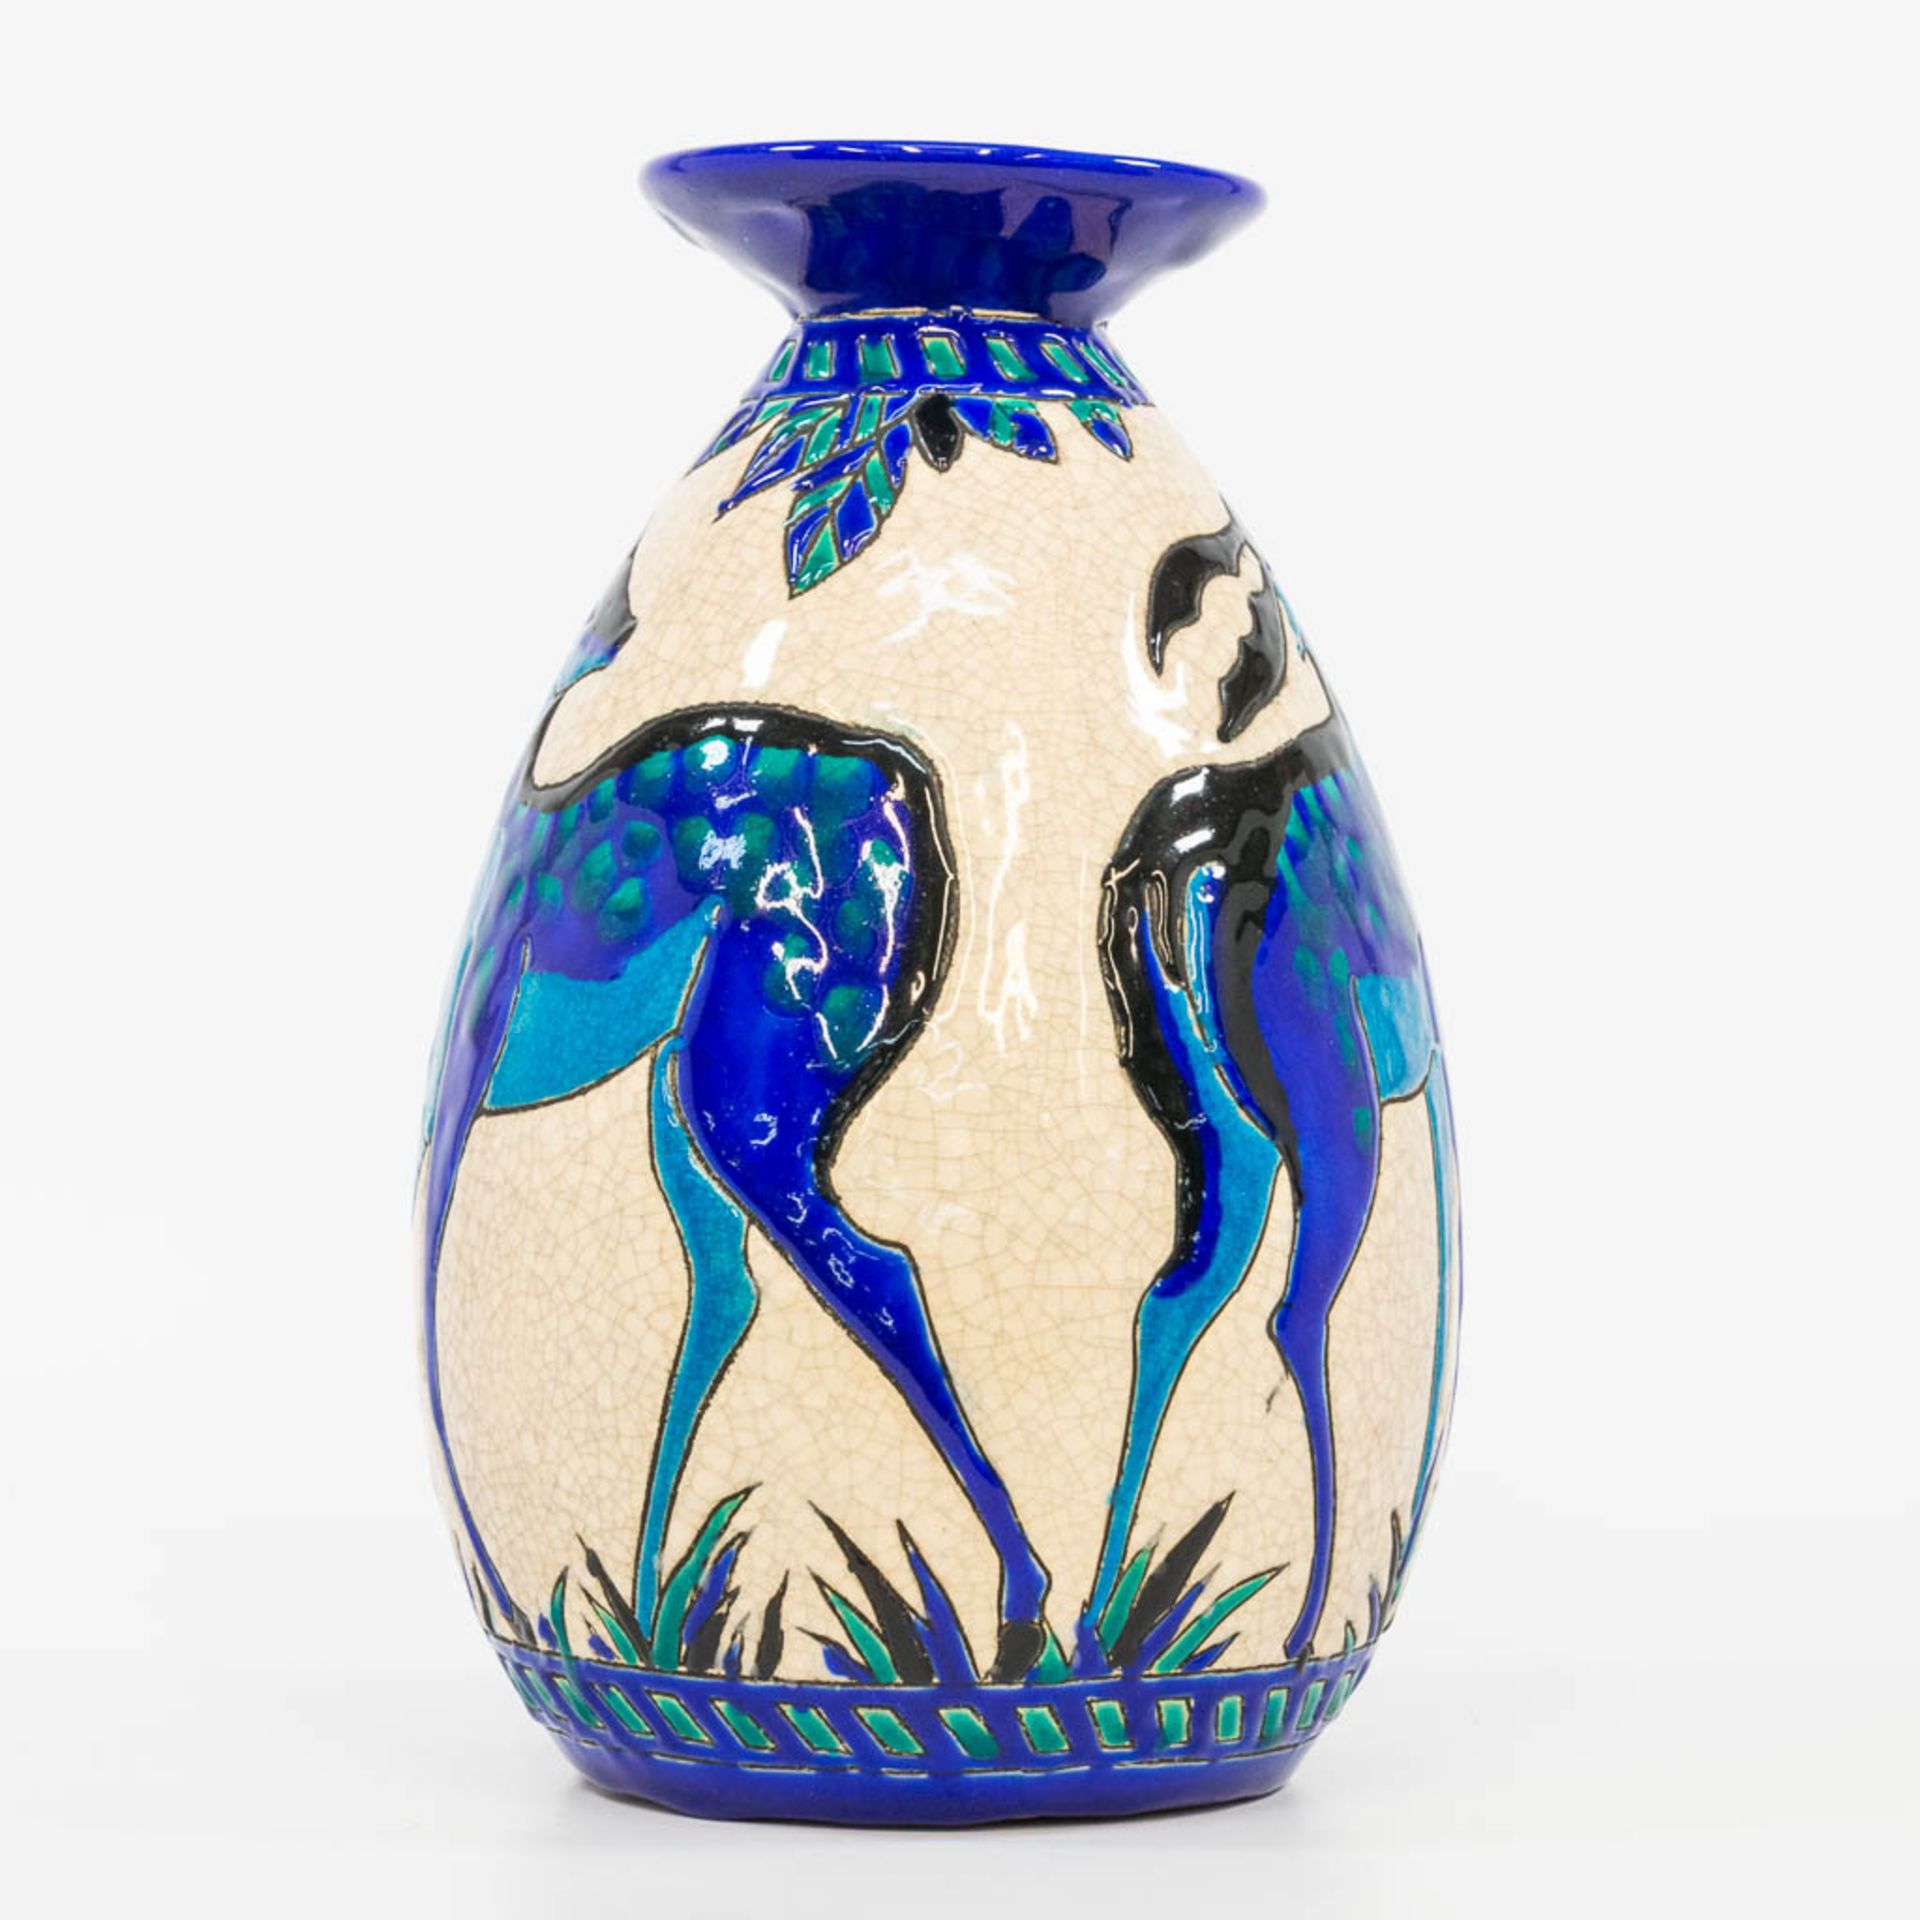 Charles CATTEAU (1880-1966) a glazed ceramic vase with decor 943 and made by Boch. (26,5 x 17 cm) - Bild 4 aus 13